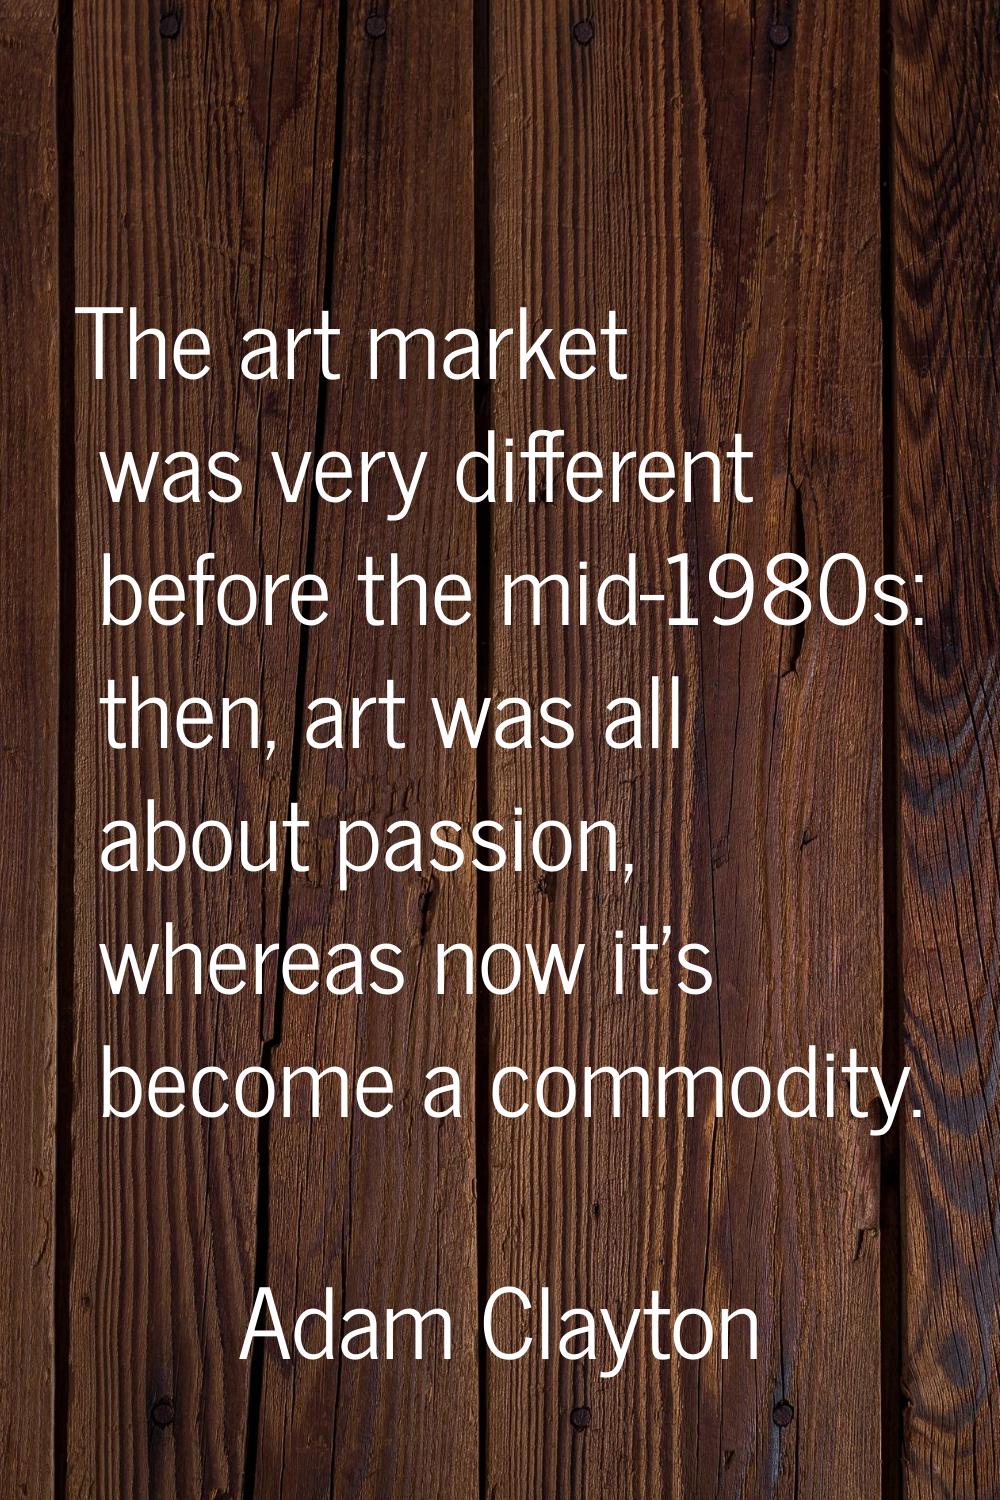 The art market was very different before the mid-1980s: then, art was all about passion, whereas no